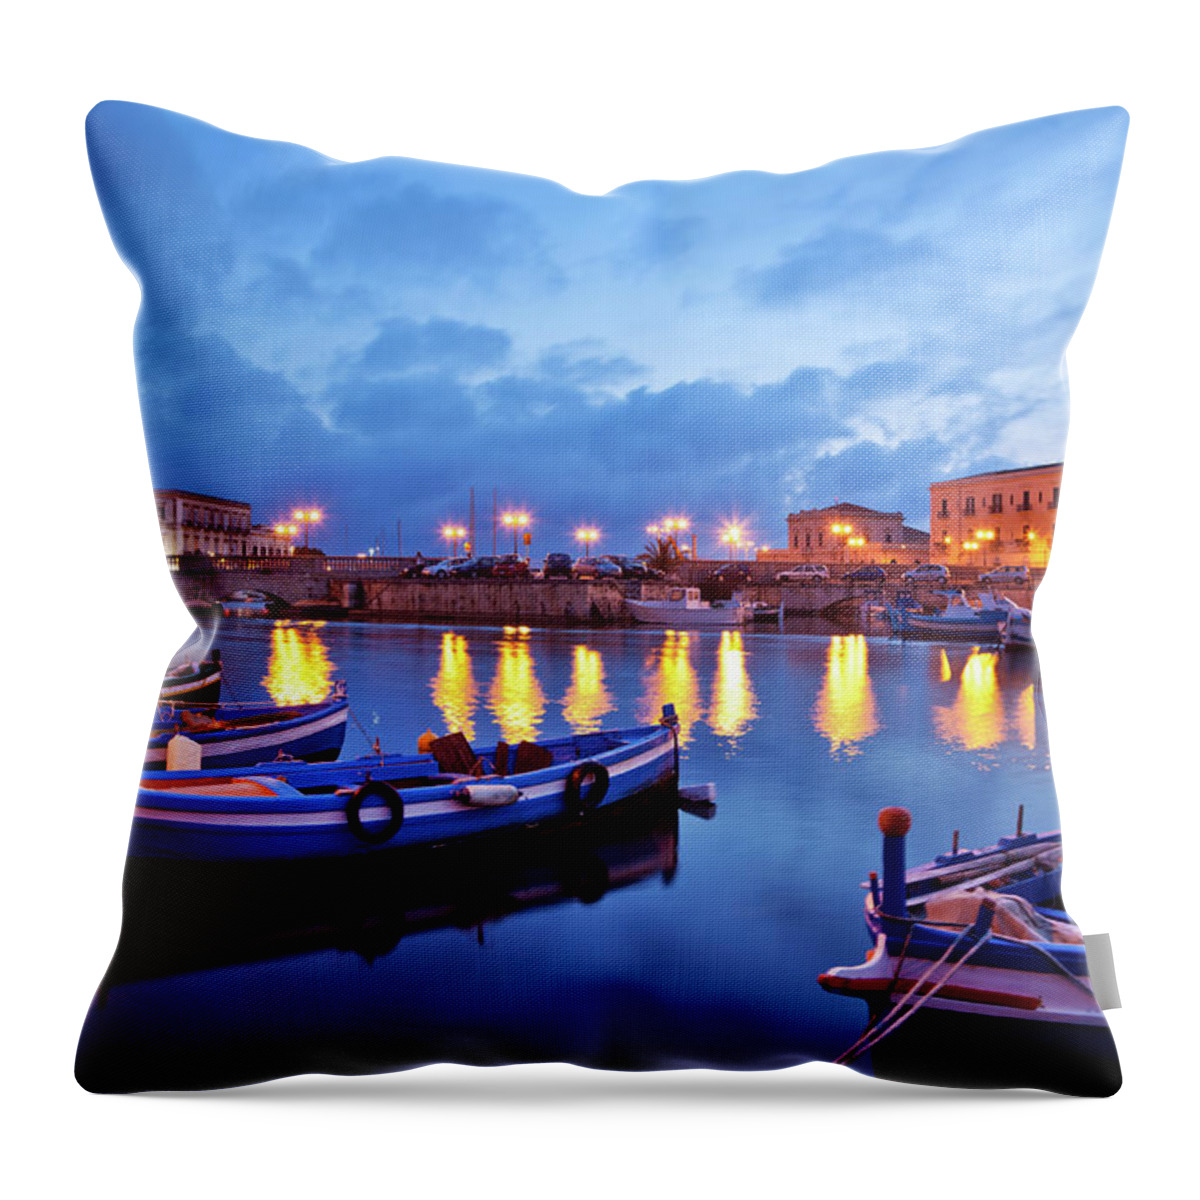 Sicily Throw Pillow featuring the photograph Boats In Sicily, Italy by Nikada